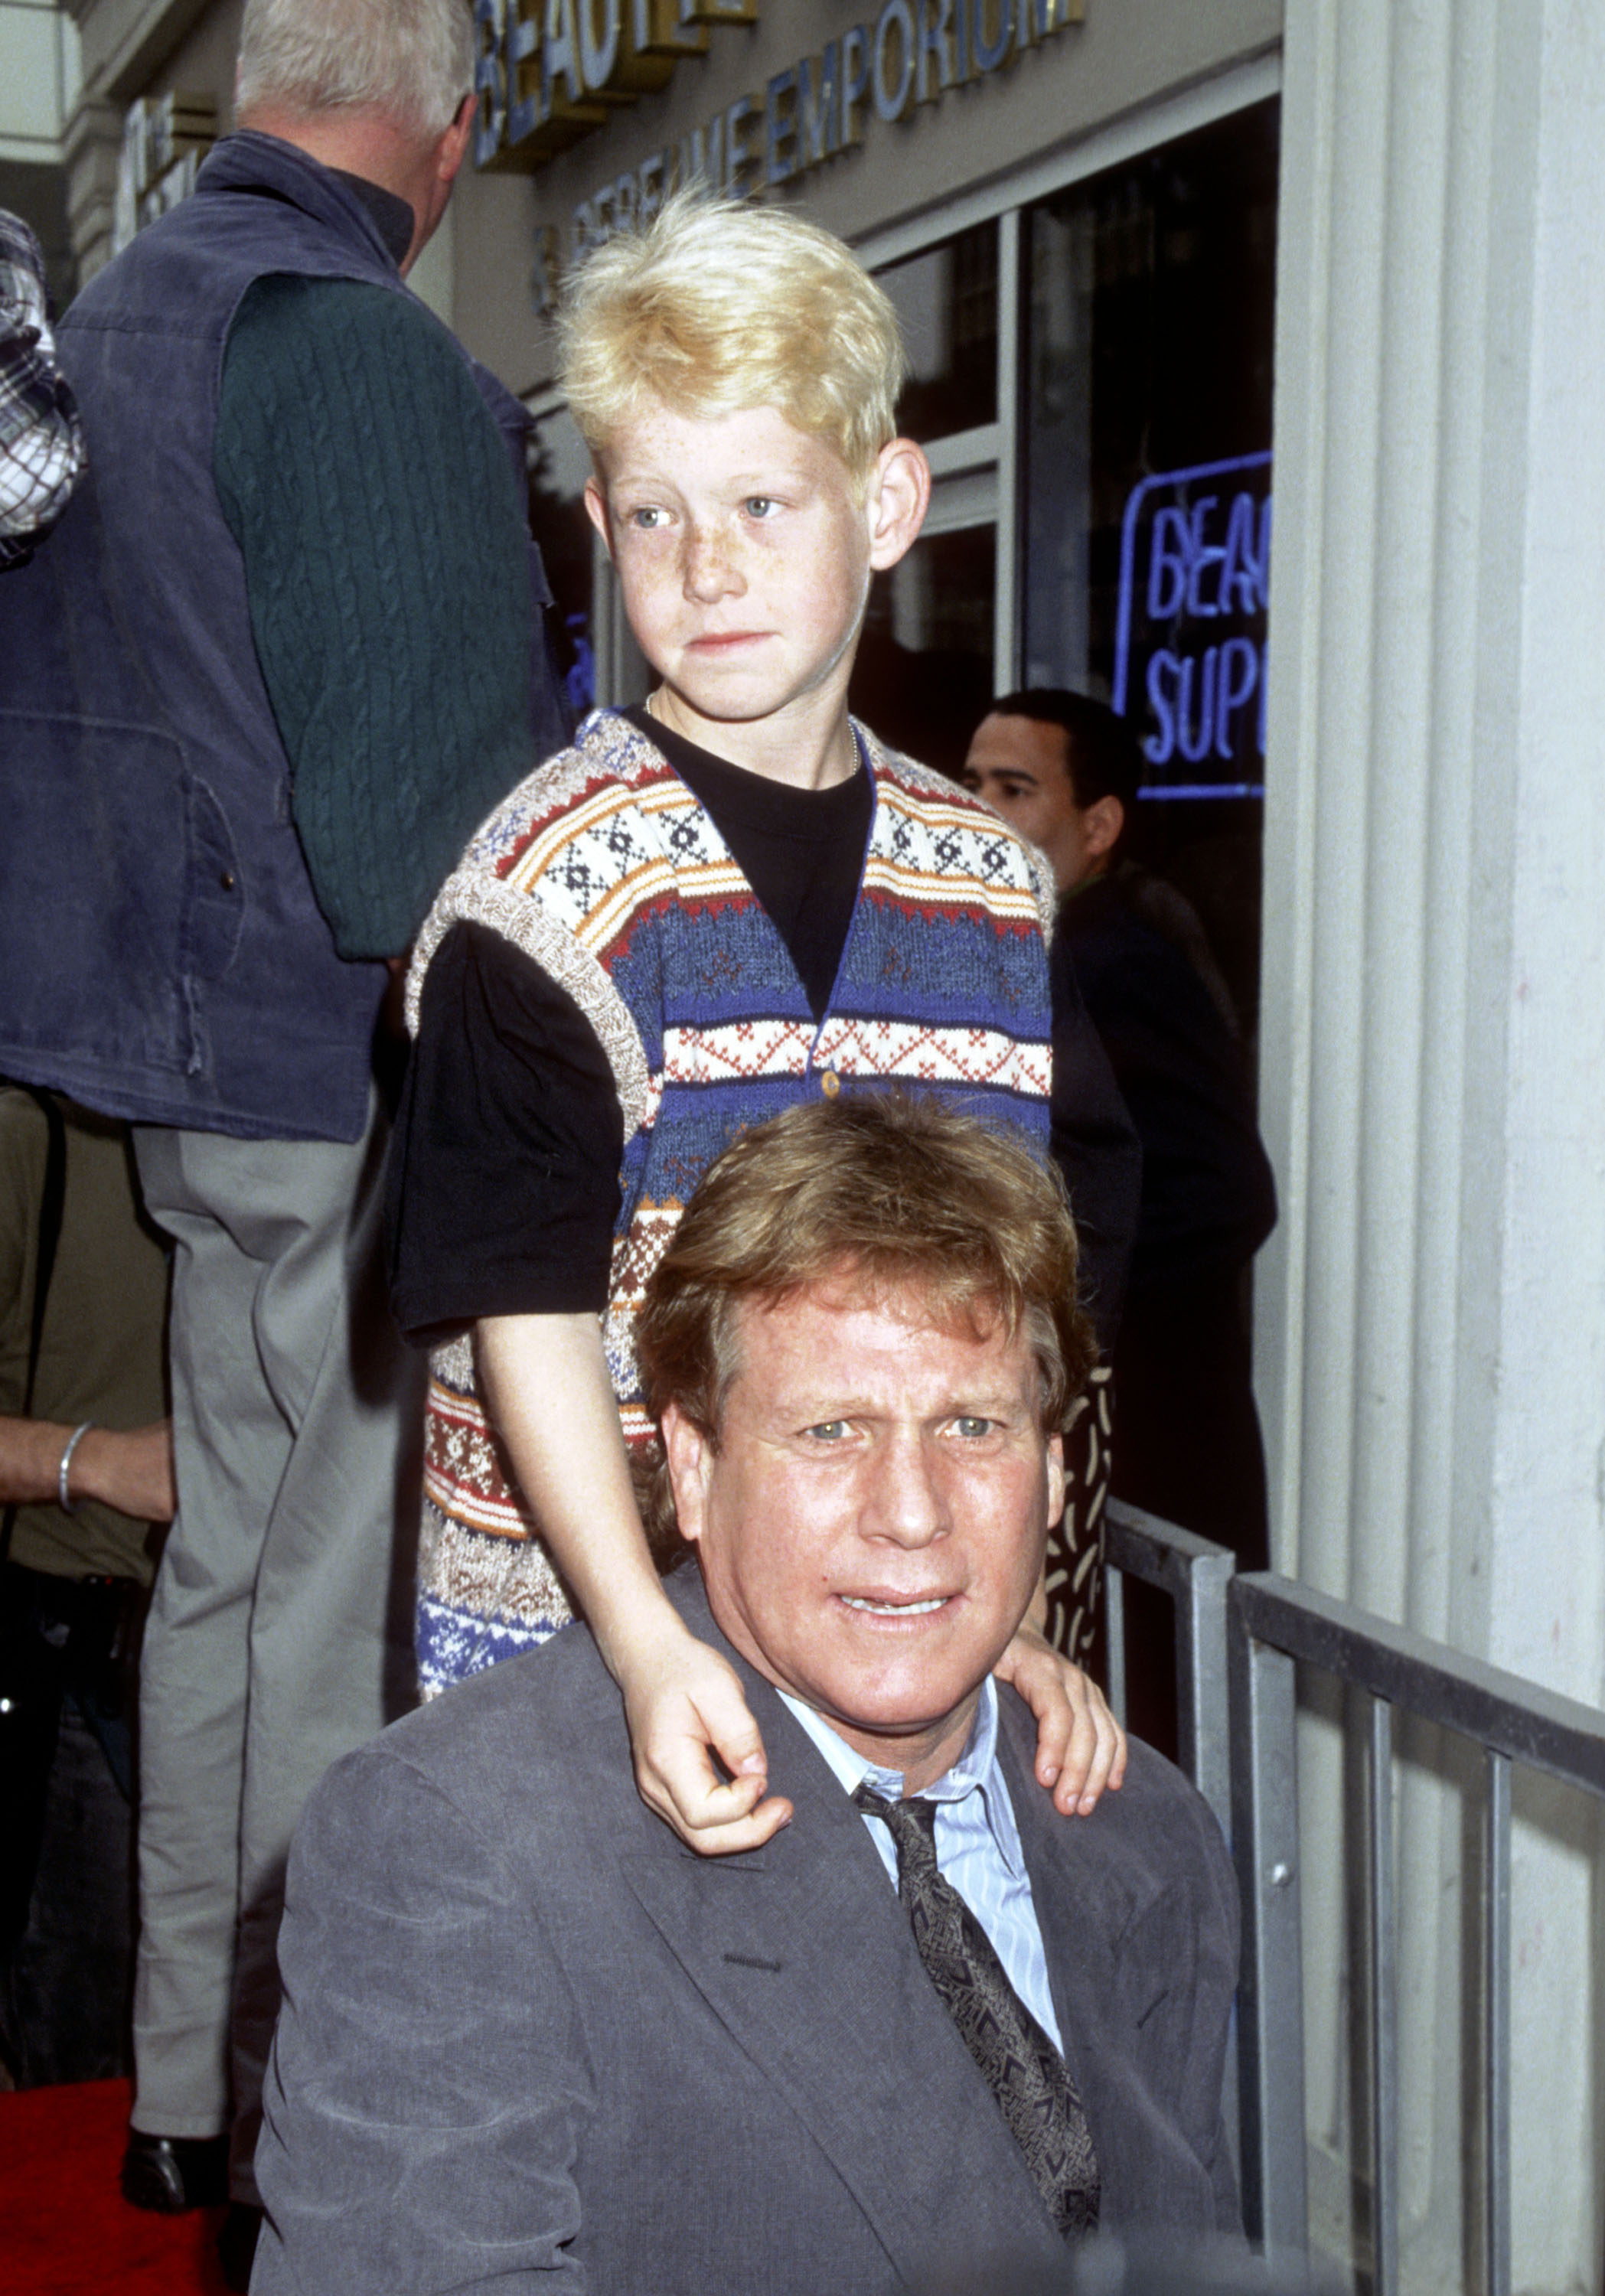 Redmond O'Neal and Ryan O'Neal as Farrah Fawcett was honored with a star on the Hollywood Walk of Fame | Source: Getty Images